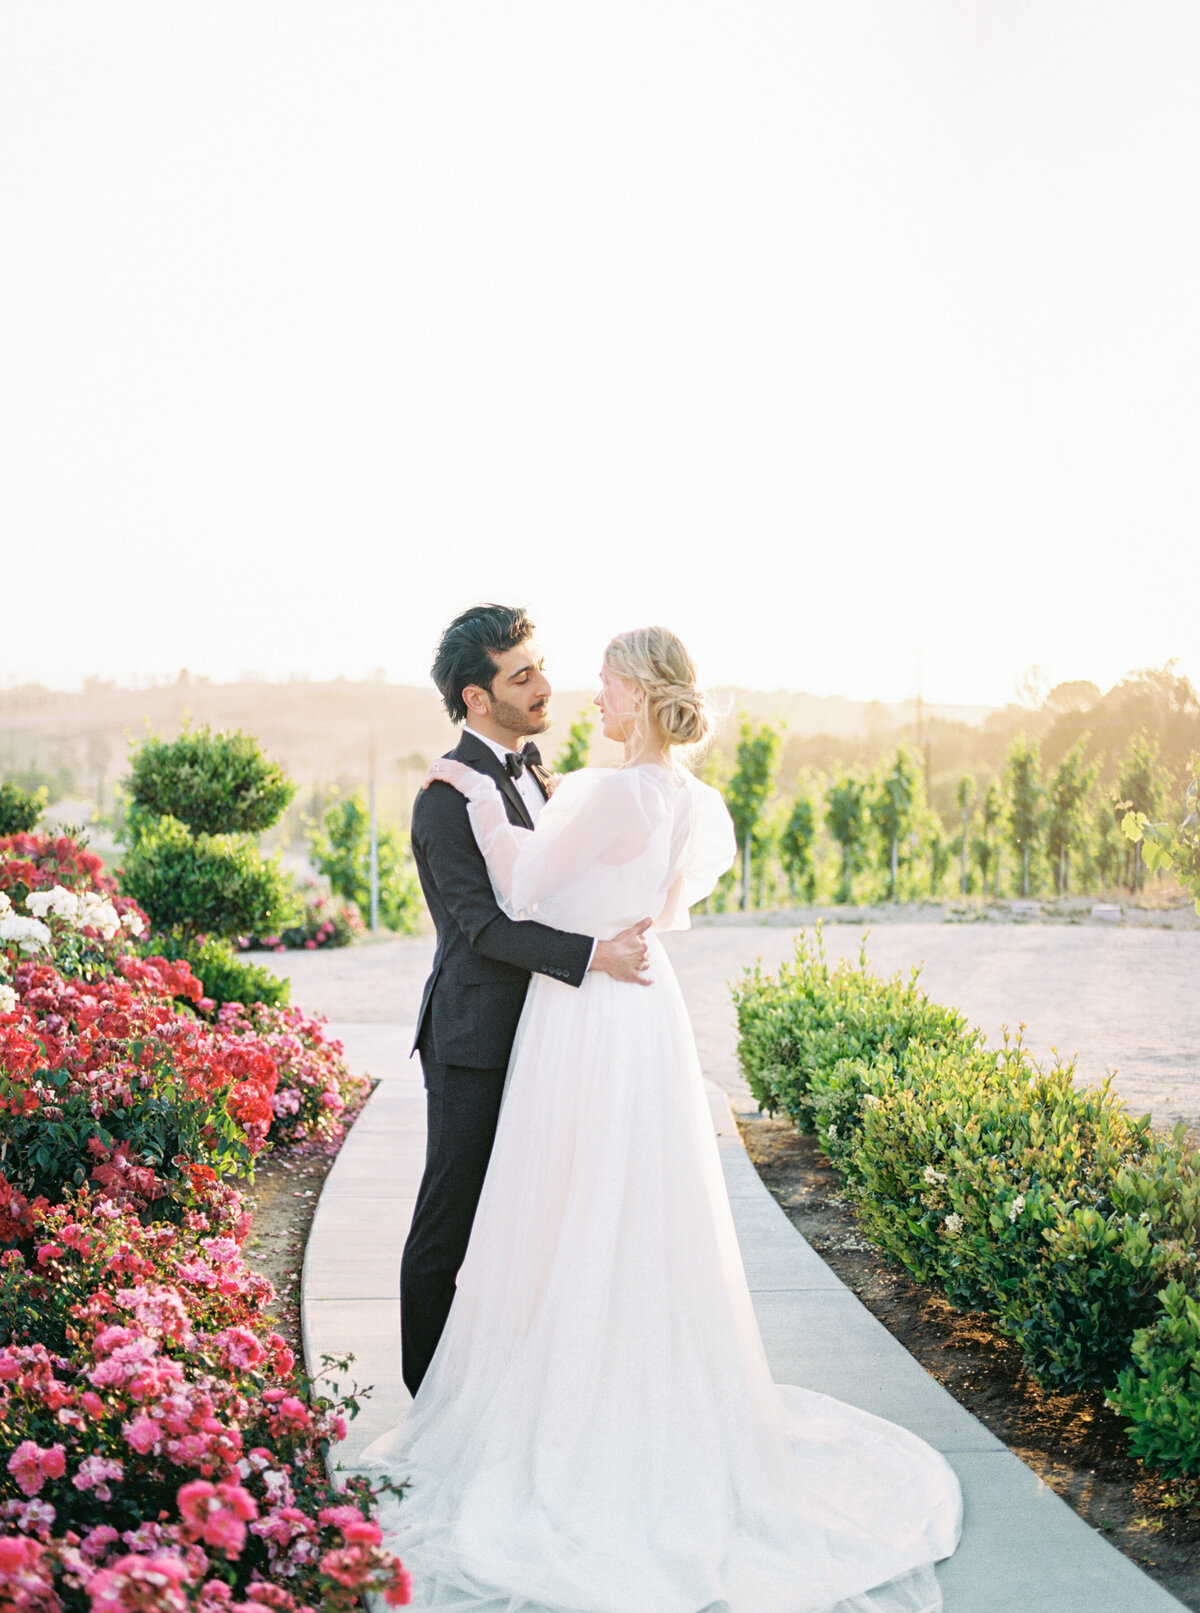 Avensole-Winery-Wedding-in-Temecula-California-by-Stormy-Peterson-Photography Winery Wedding Photographer-007